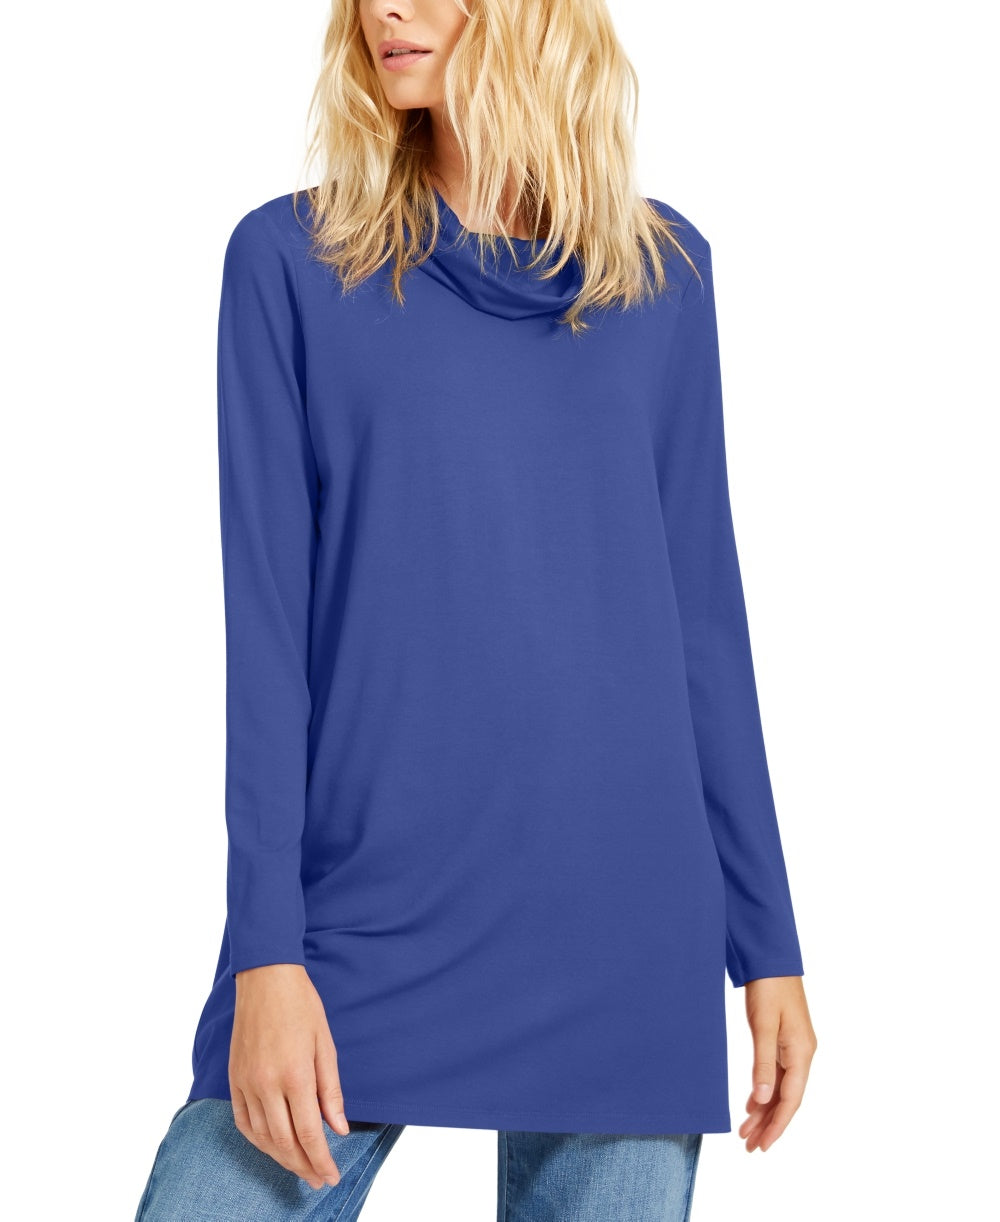 Eileen Fisher Women's Cowl Neck Tunic Top Purple Size Small